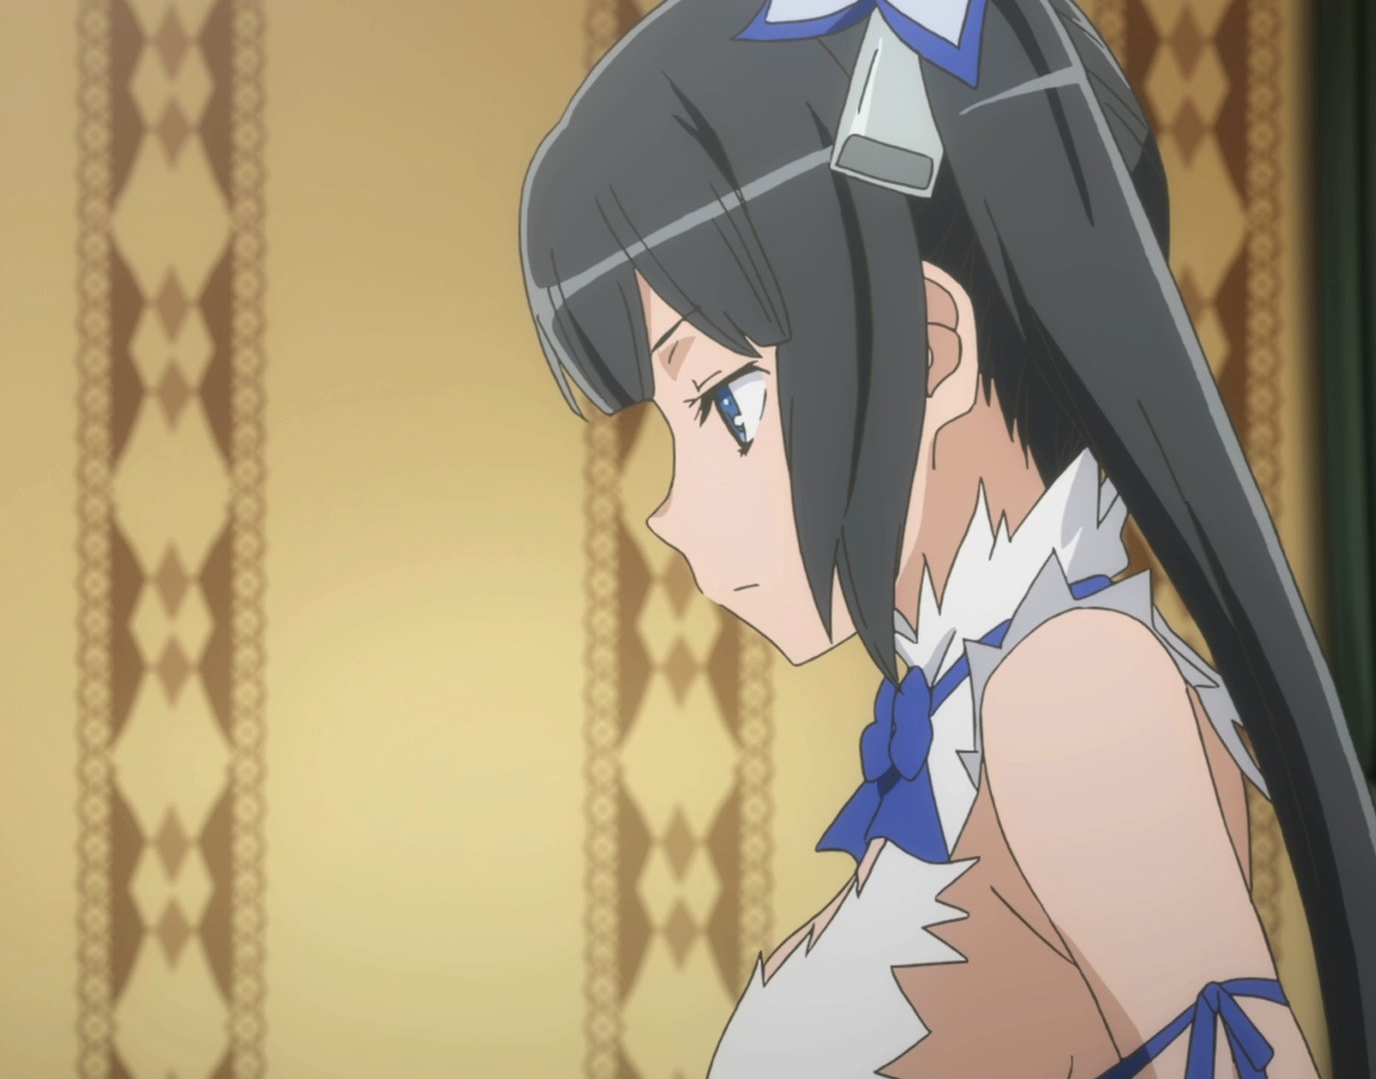 Blue-haired elf girl from "Is It Wrong to Try to Pick Up Girls in a Dungeon?" - wide 6